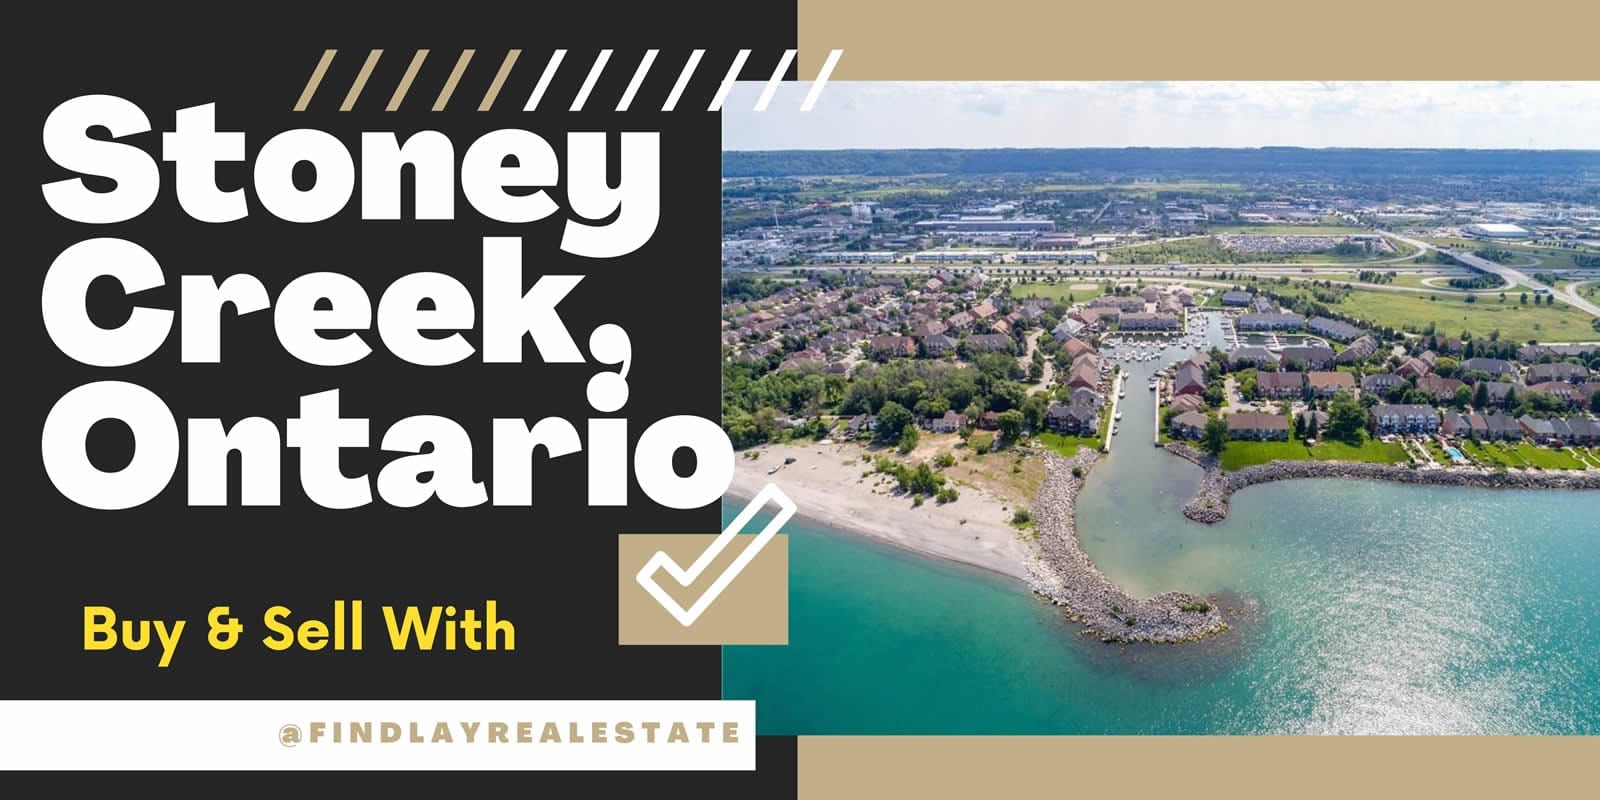 Buying And Selling Stoney Creek Hamilton Winona LakePointe FiftyPoint Grimsby Homes Findlay Real Estate 